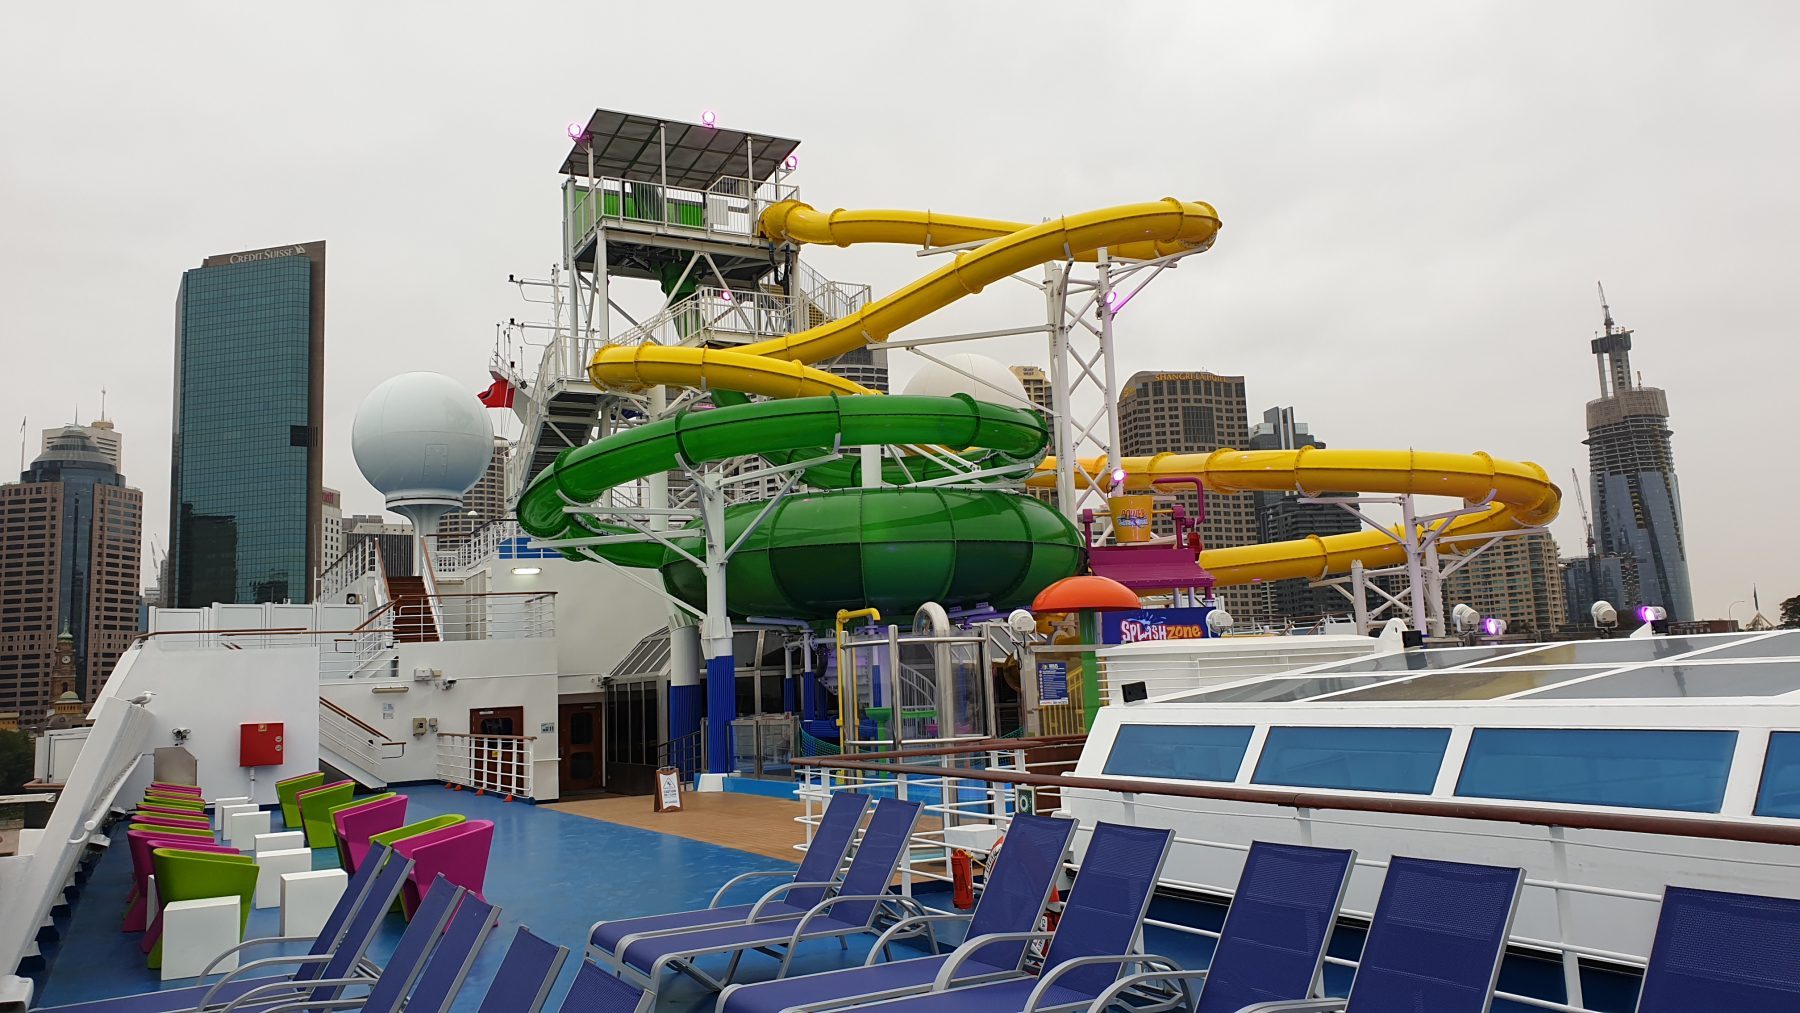 carnival cruise water slide height restrictions